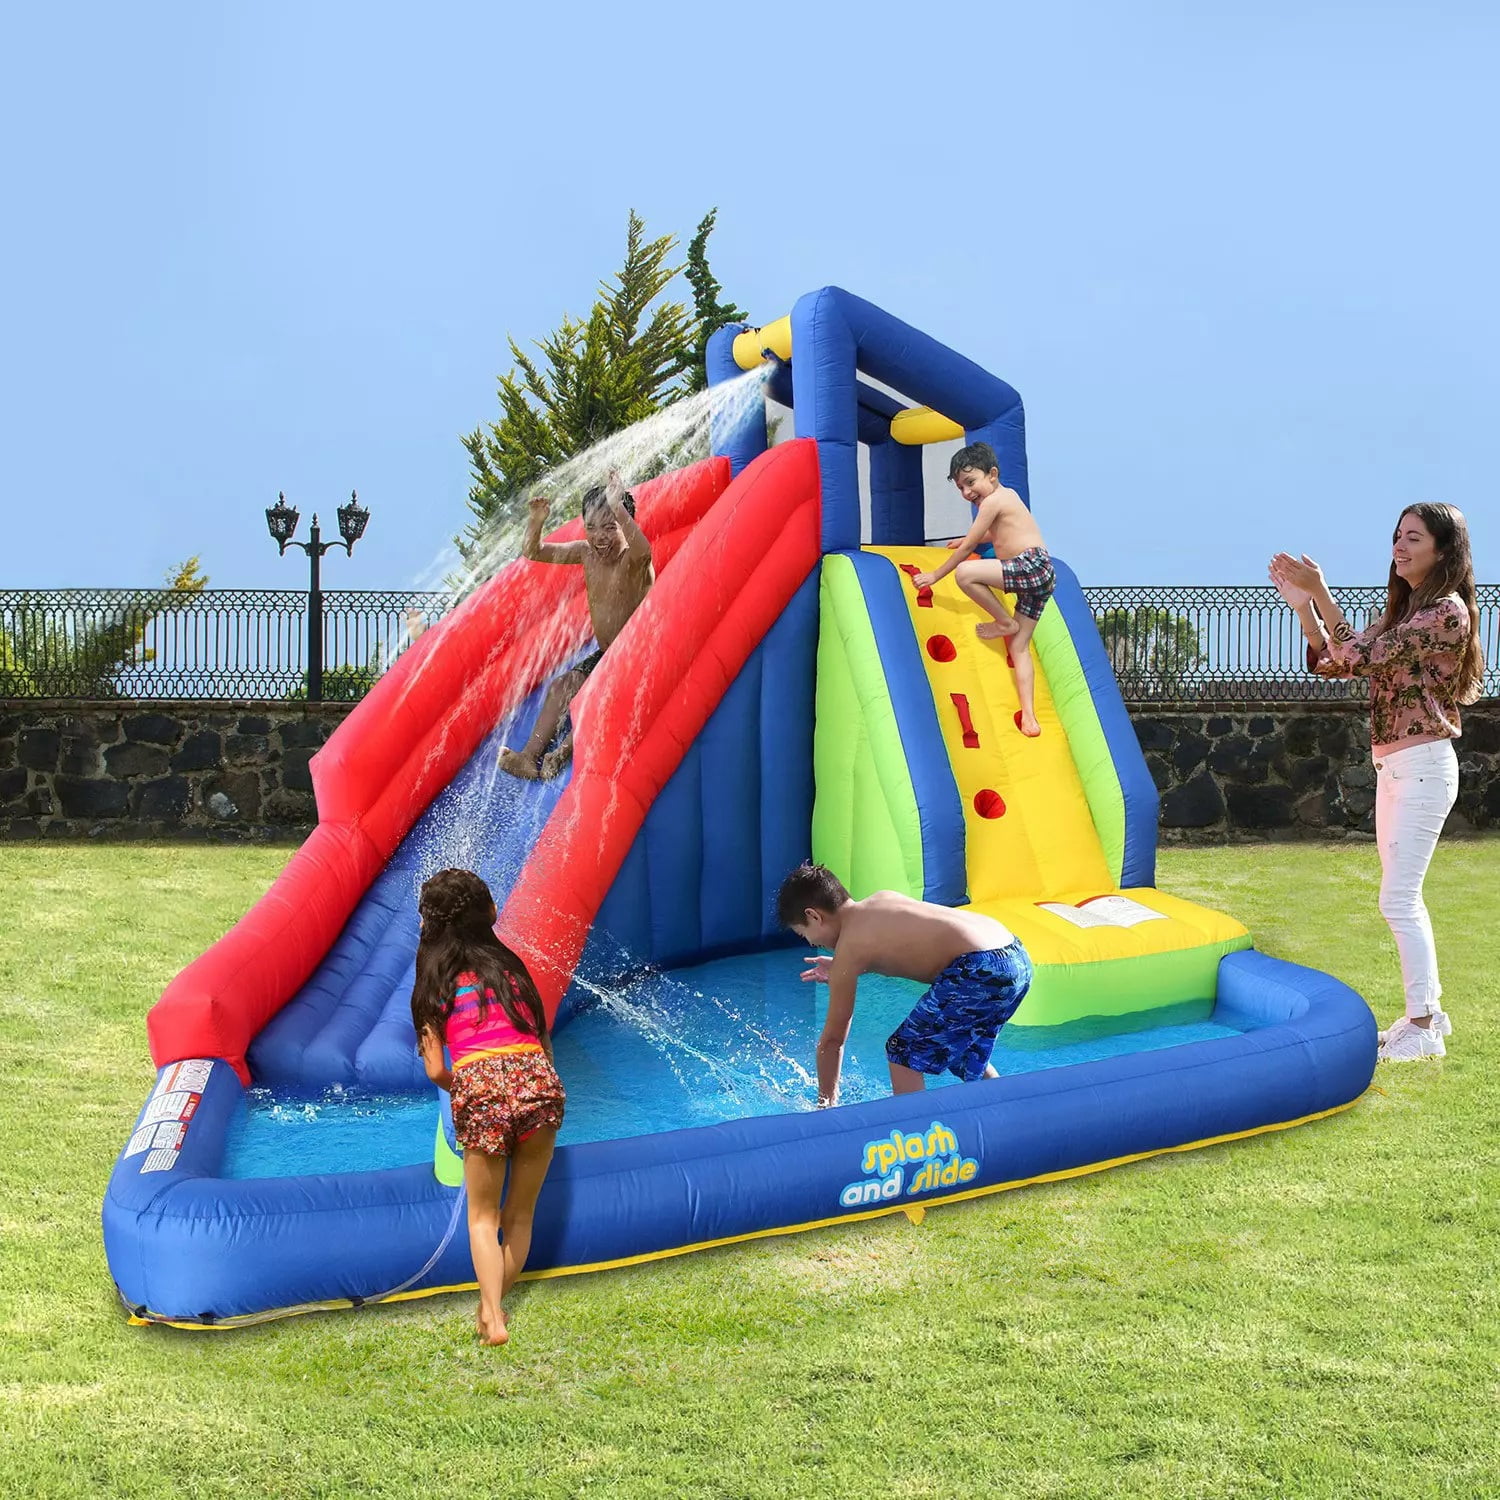 Details about   Kids Inflatable Water Slide Park with Climbing Wall and Pool 